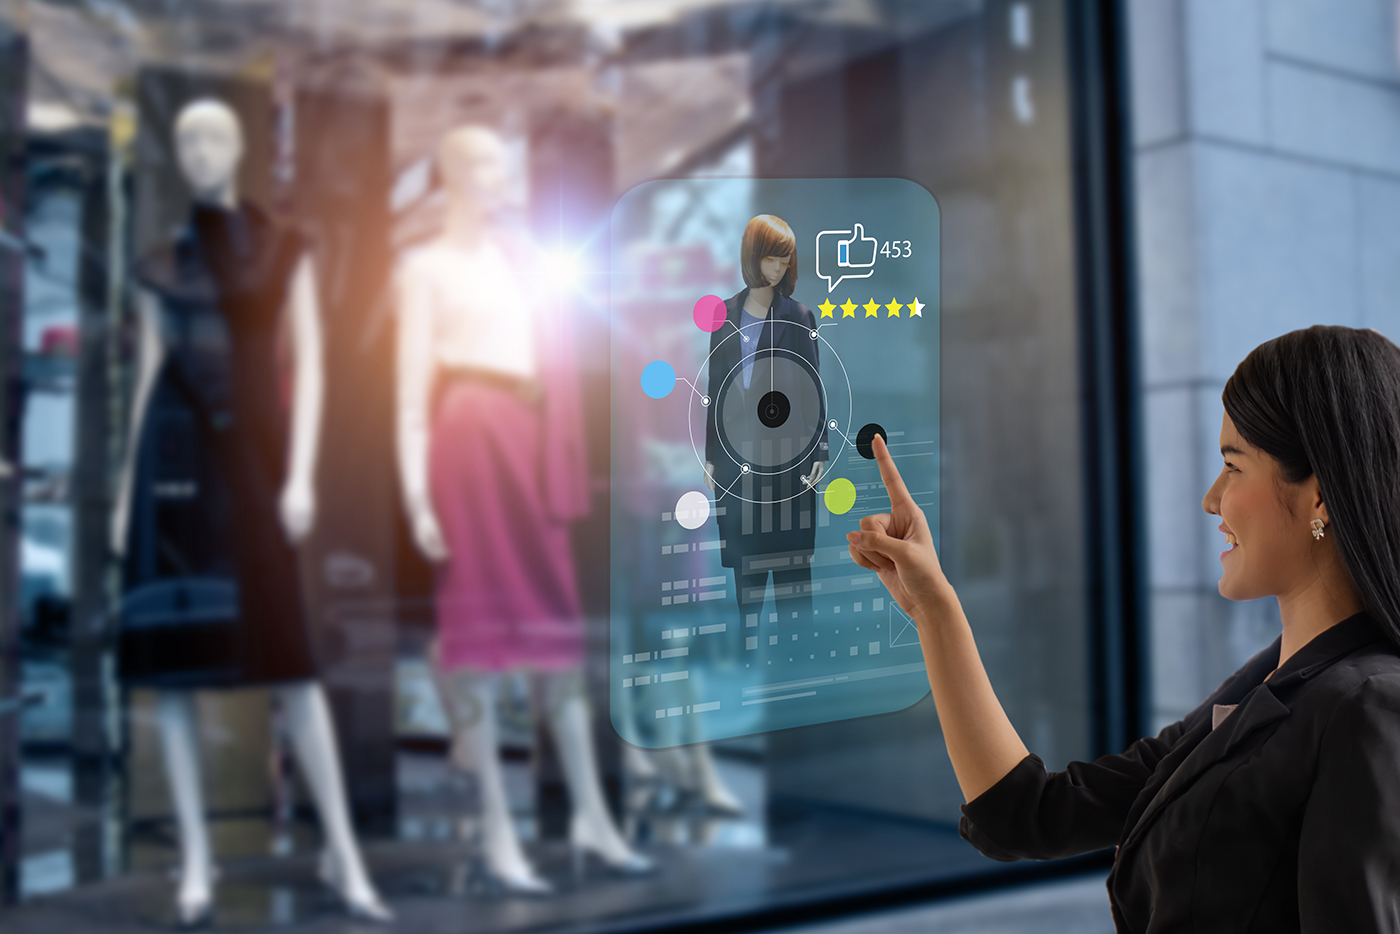 What Will Fashion Retail Look Like In The Future? | Bernard Marr